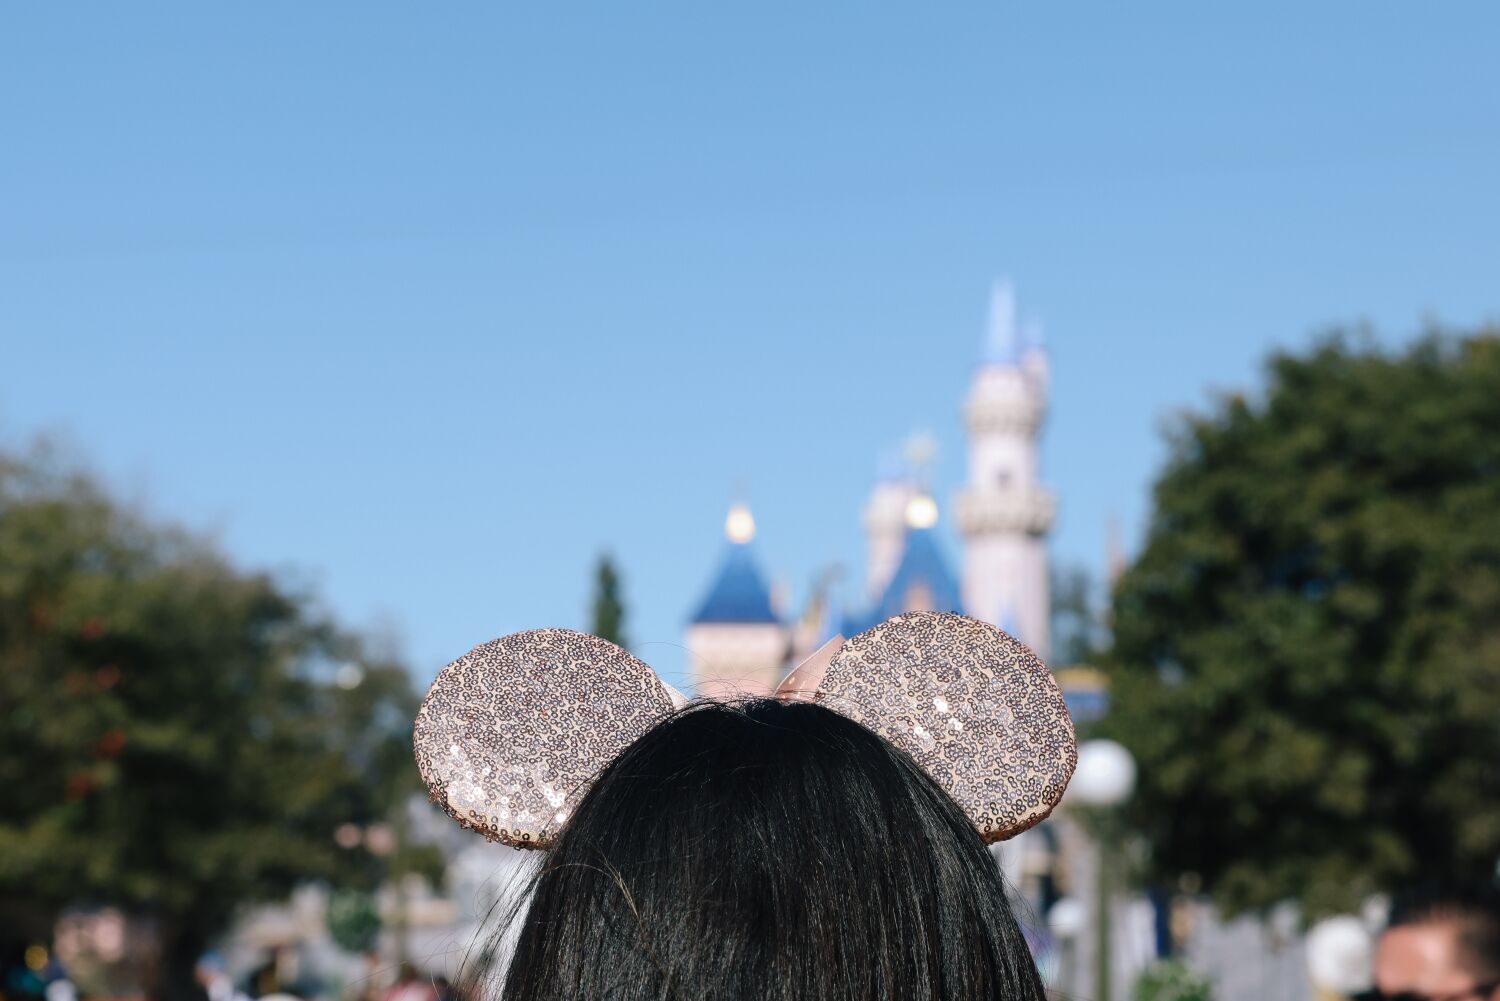 Obsessed with Disneyland? Share your favorite tips, tricks and hacks 